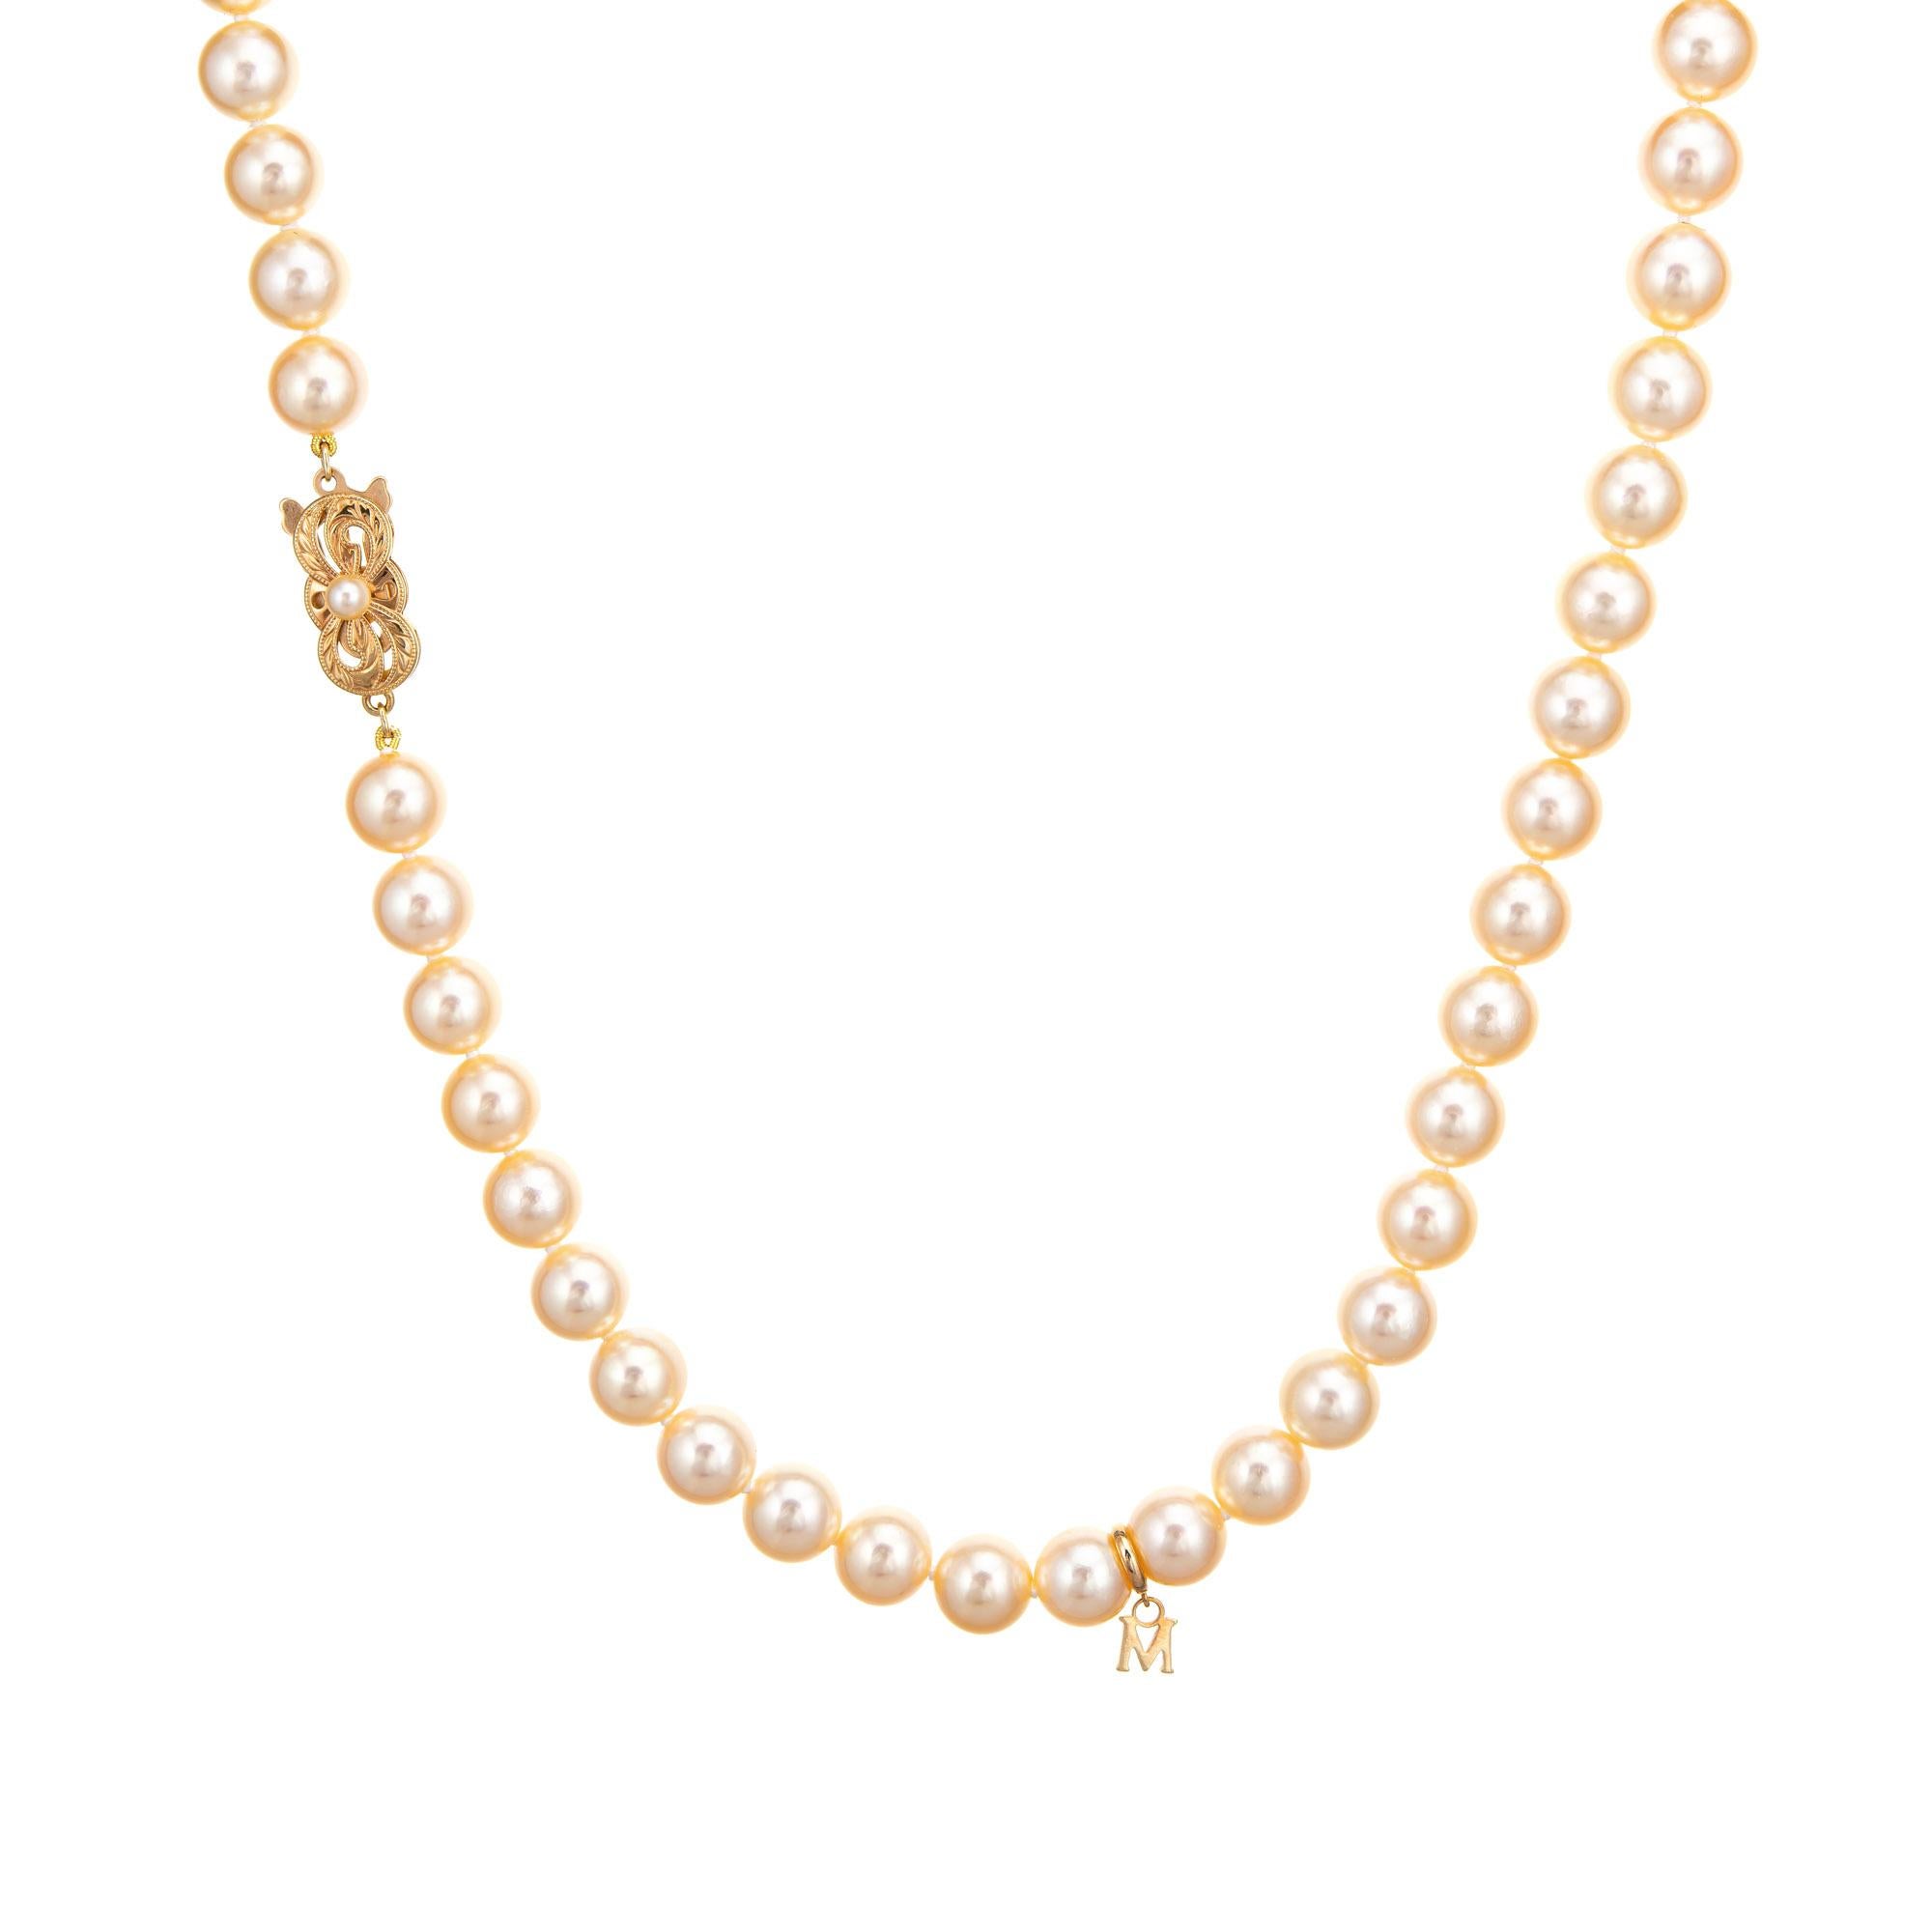 Elegant Mikimoto cultured Akoya pearl necklace finished with a 18k yellow gold clasp (circa 2003). 

8mm cultured Akoya pearls are individually knotted. The pearls are lustrous and show a glossy golden champagne hue. 

The necklace was created in